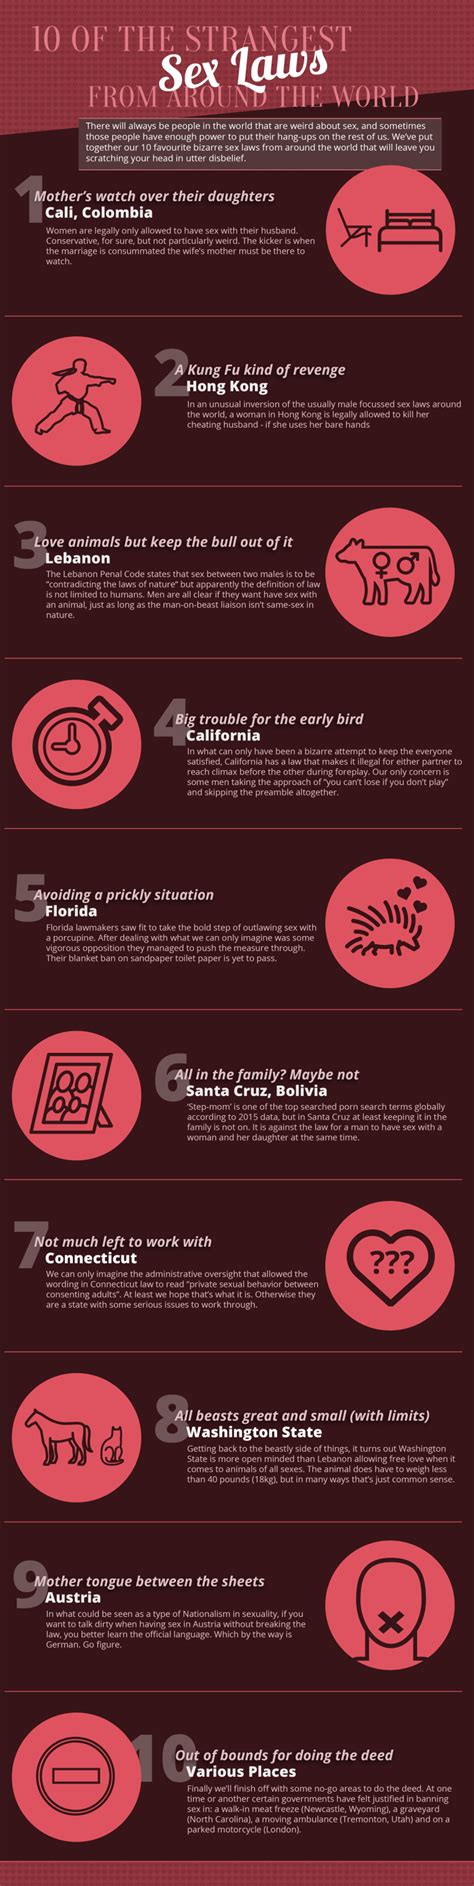 10 Bizarre Sex Laws Around The World [infographic] More Foreplay